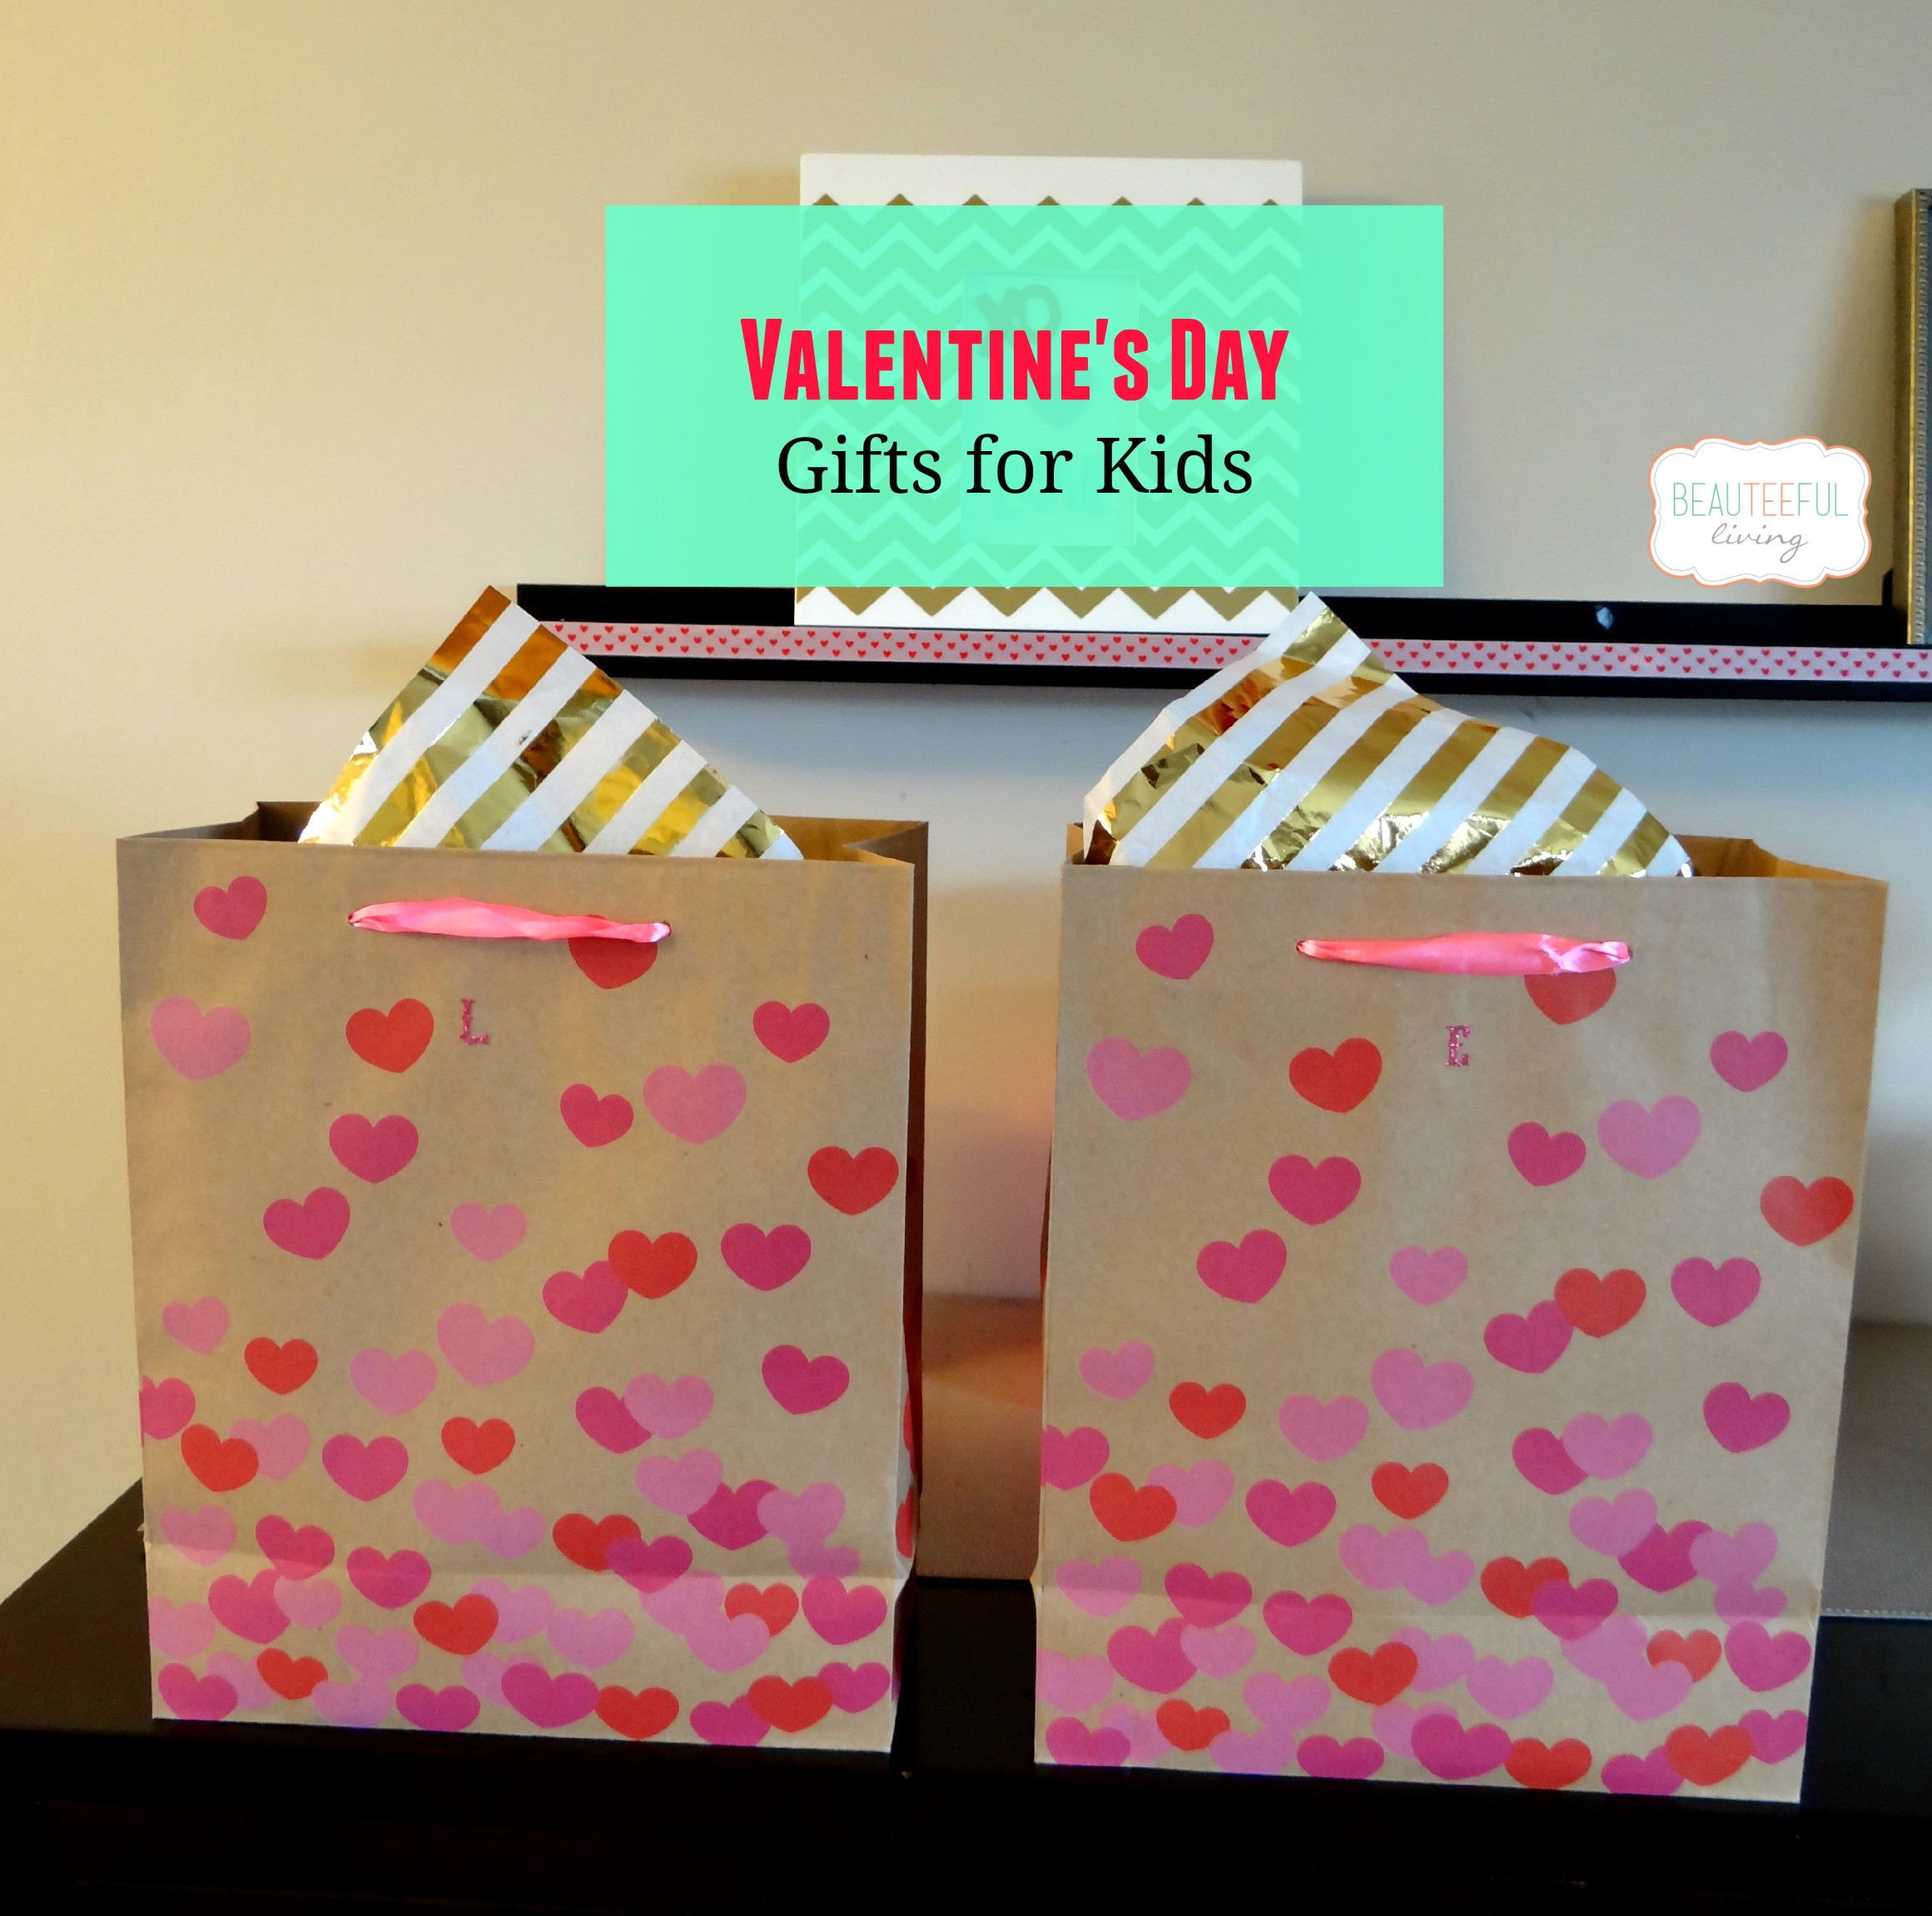 Valentines Day Gift Baskets
 Valentine s Day Gifts for Kids BEAUTEEFUL Living